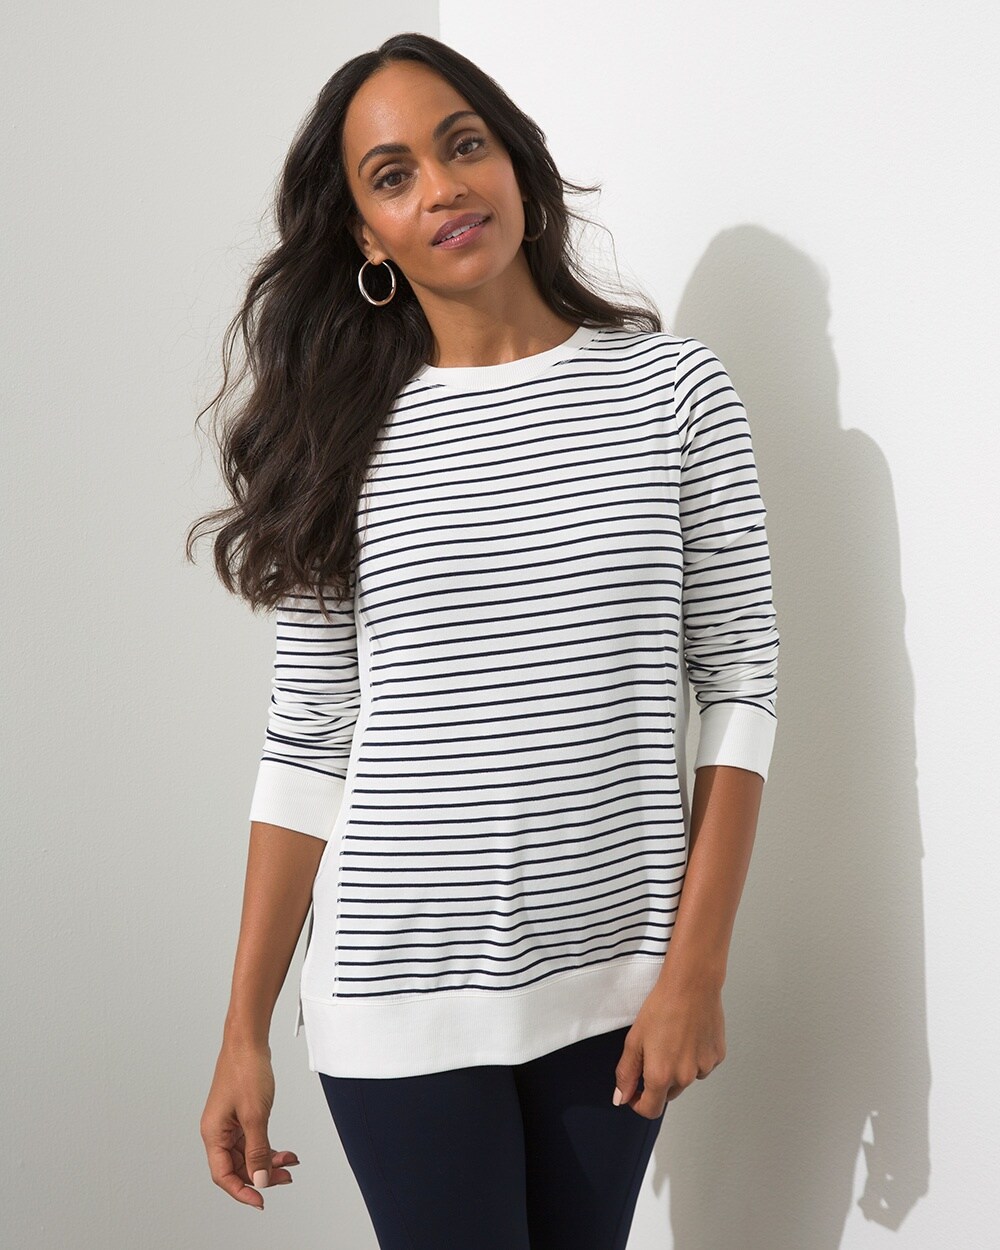 Zenergy French Terry Stripe Rib Mix Tunic video preview image, click to start video